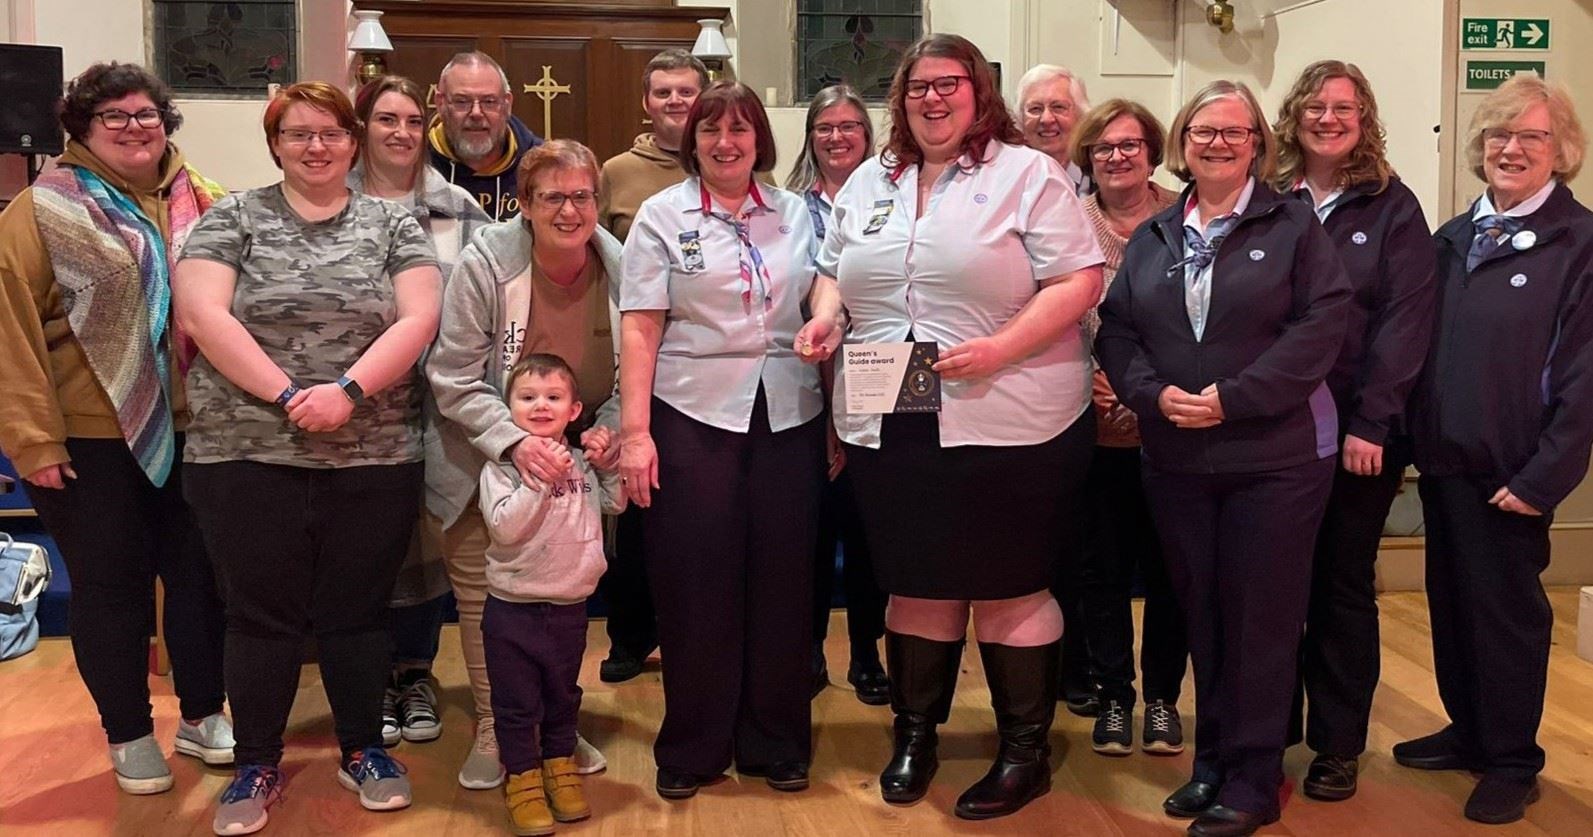 Laura Smith received her award surrounded by friends, family and fellow members of Girlguiding.